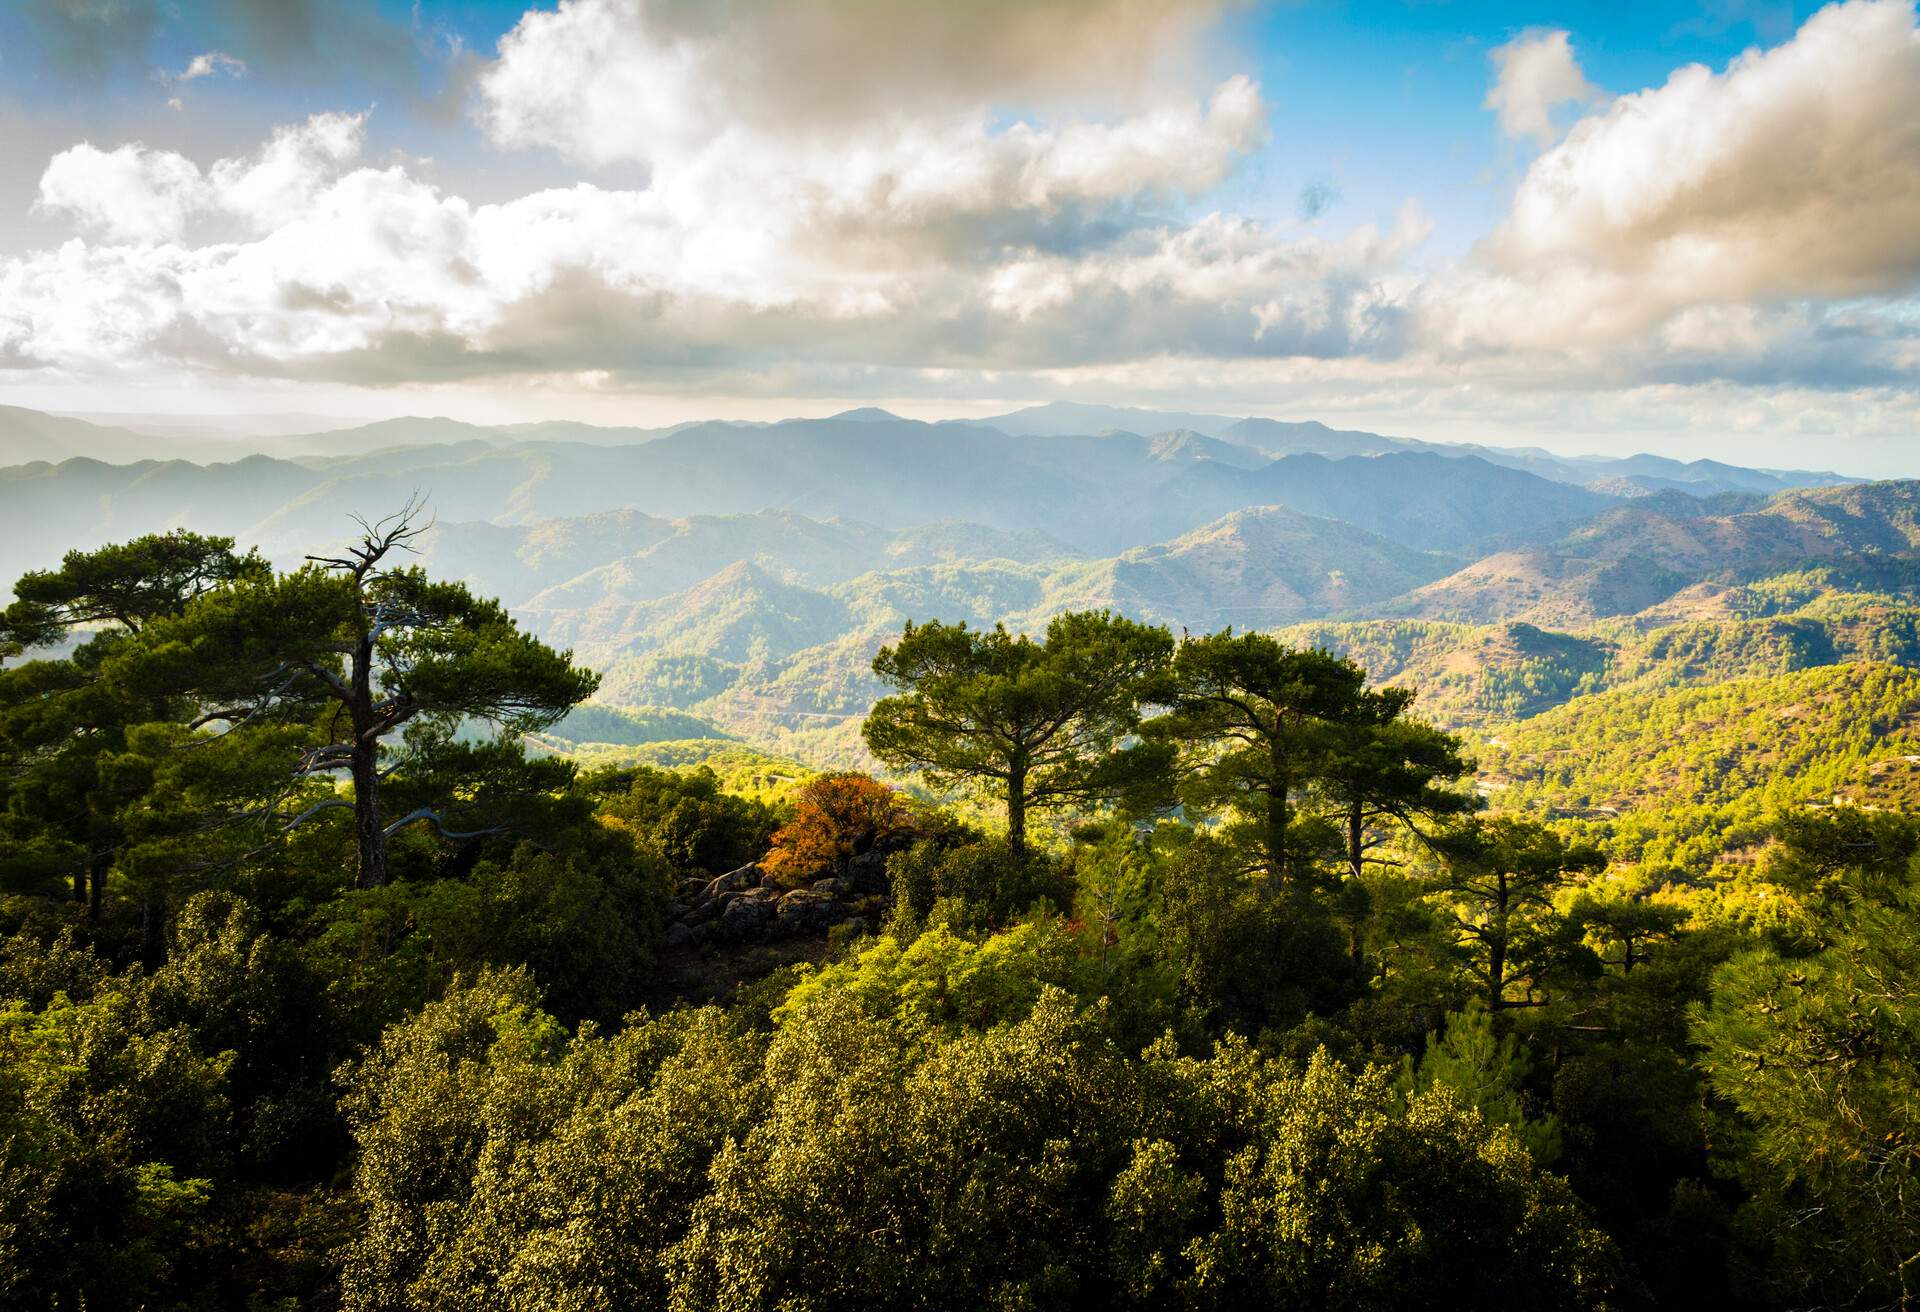 DEST_CYPRUS_TROODOS_MOUNTAINS_GettyImages-1248144595